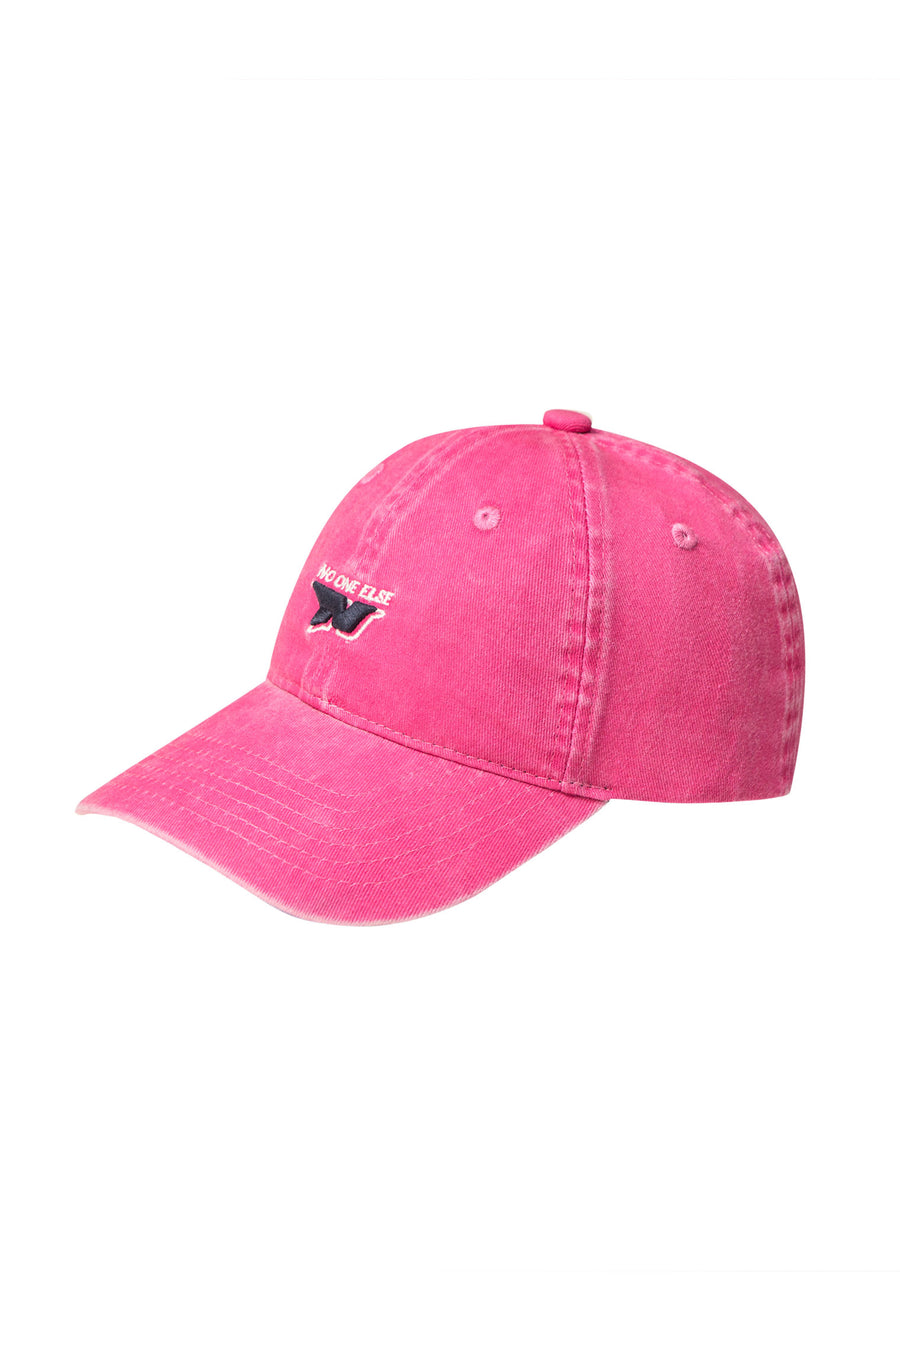 CHUU Vintage Embroidered Ball Cap